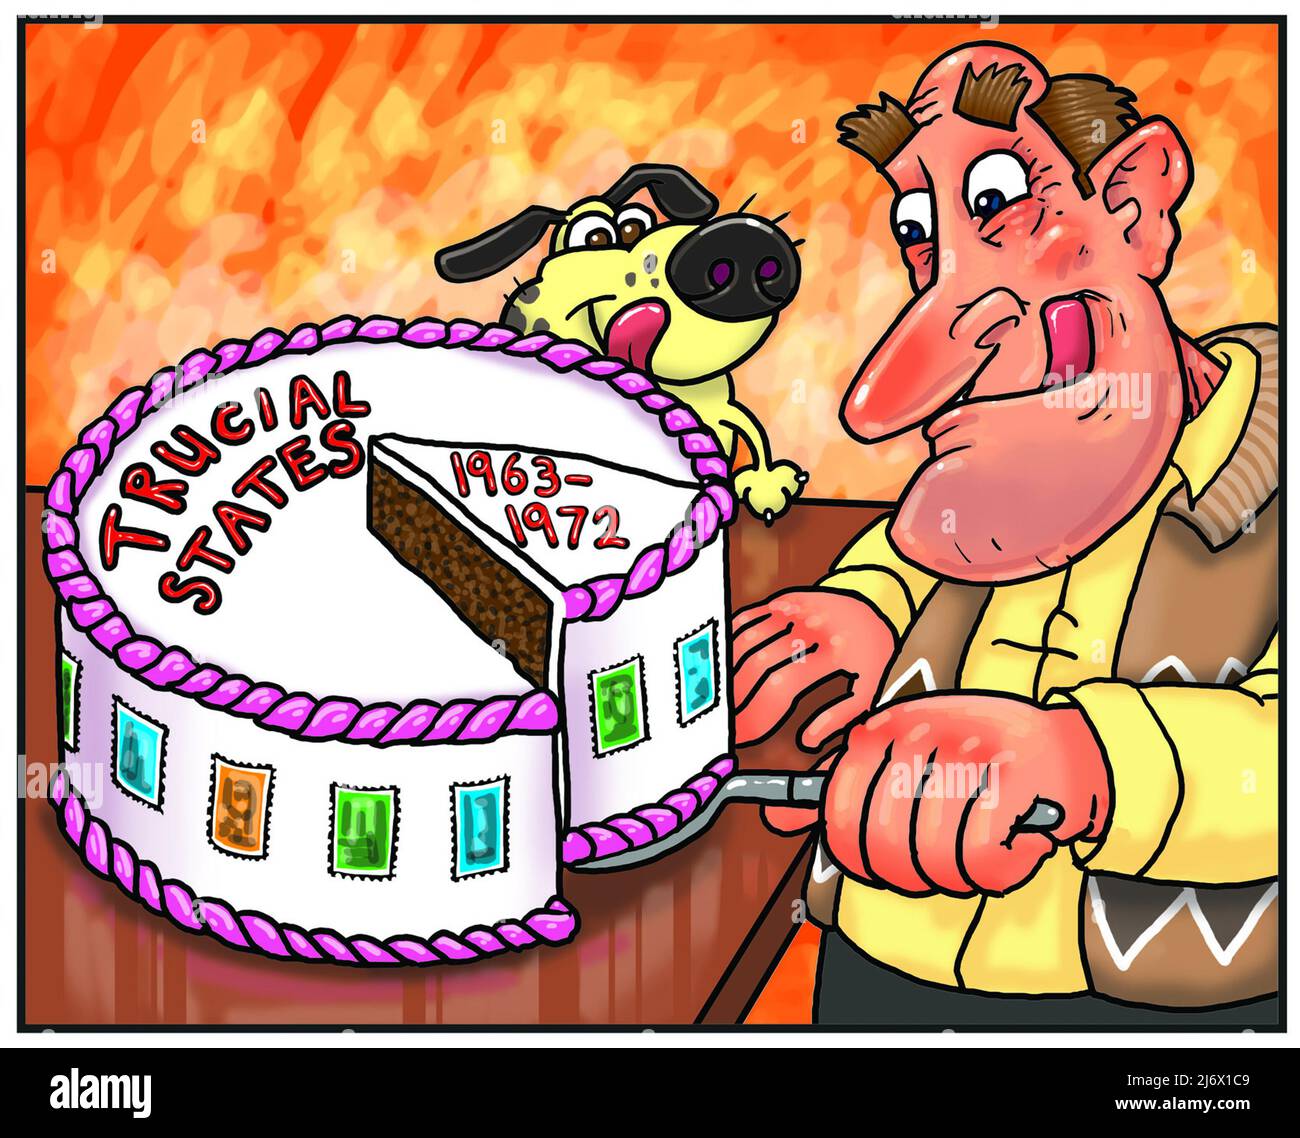 Funny cartoon art of man slicing a cake with the words Trucial States 1963-1972 illustrating the appeal of Trucial States stamp collecting philately Stock Photo